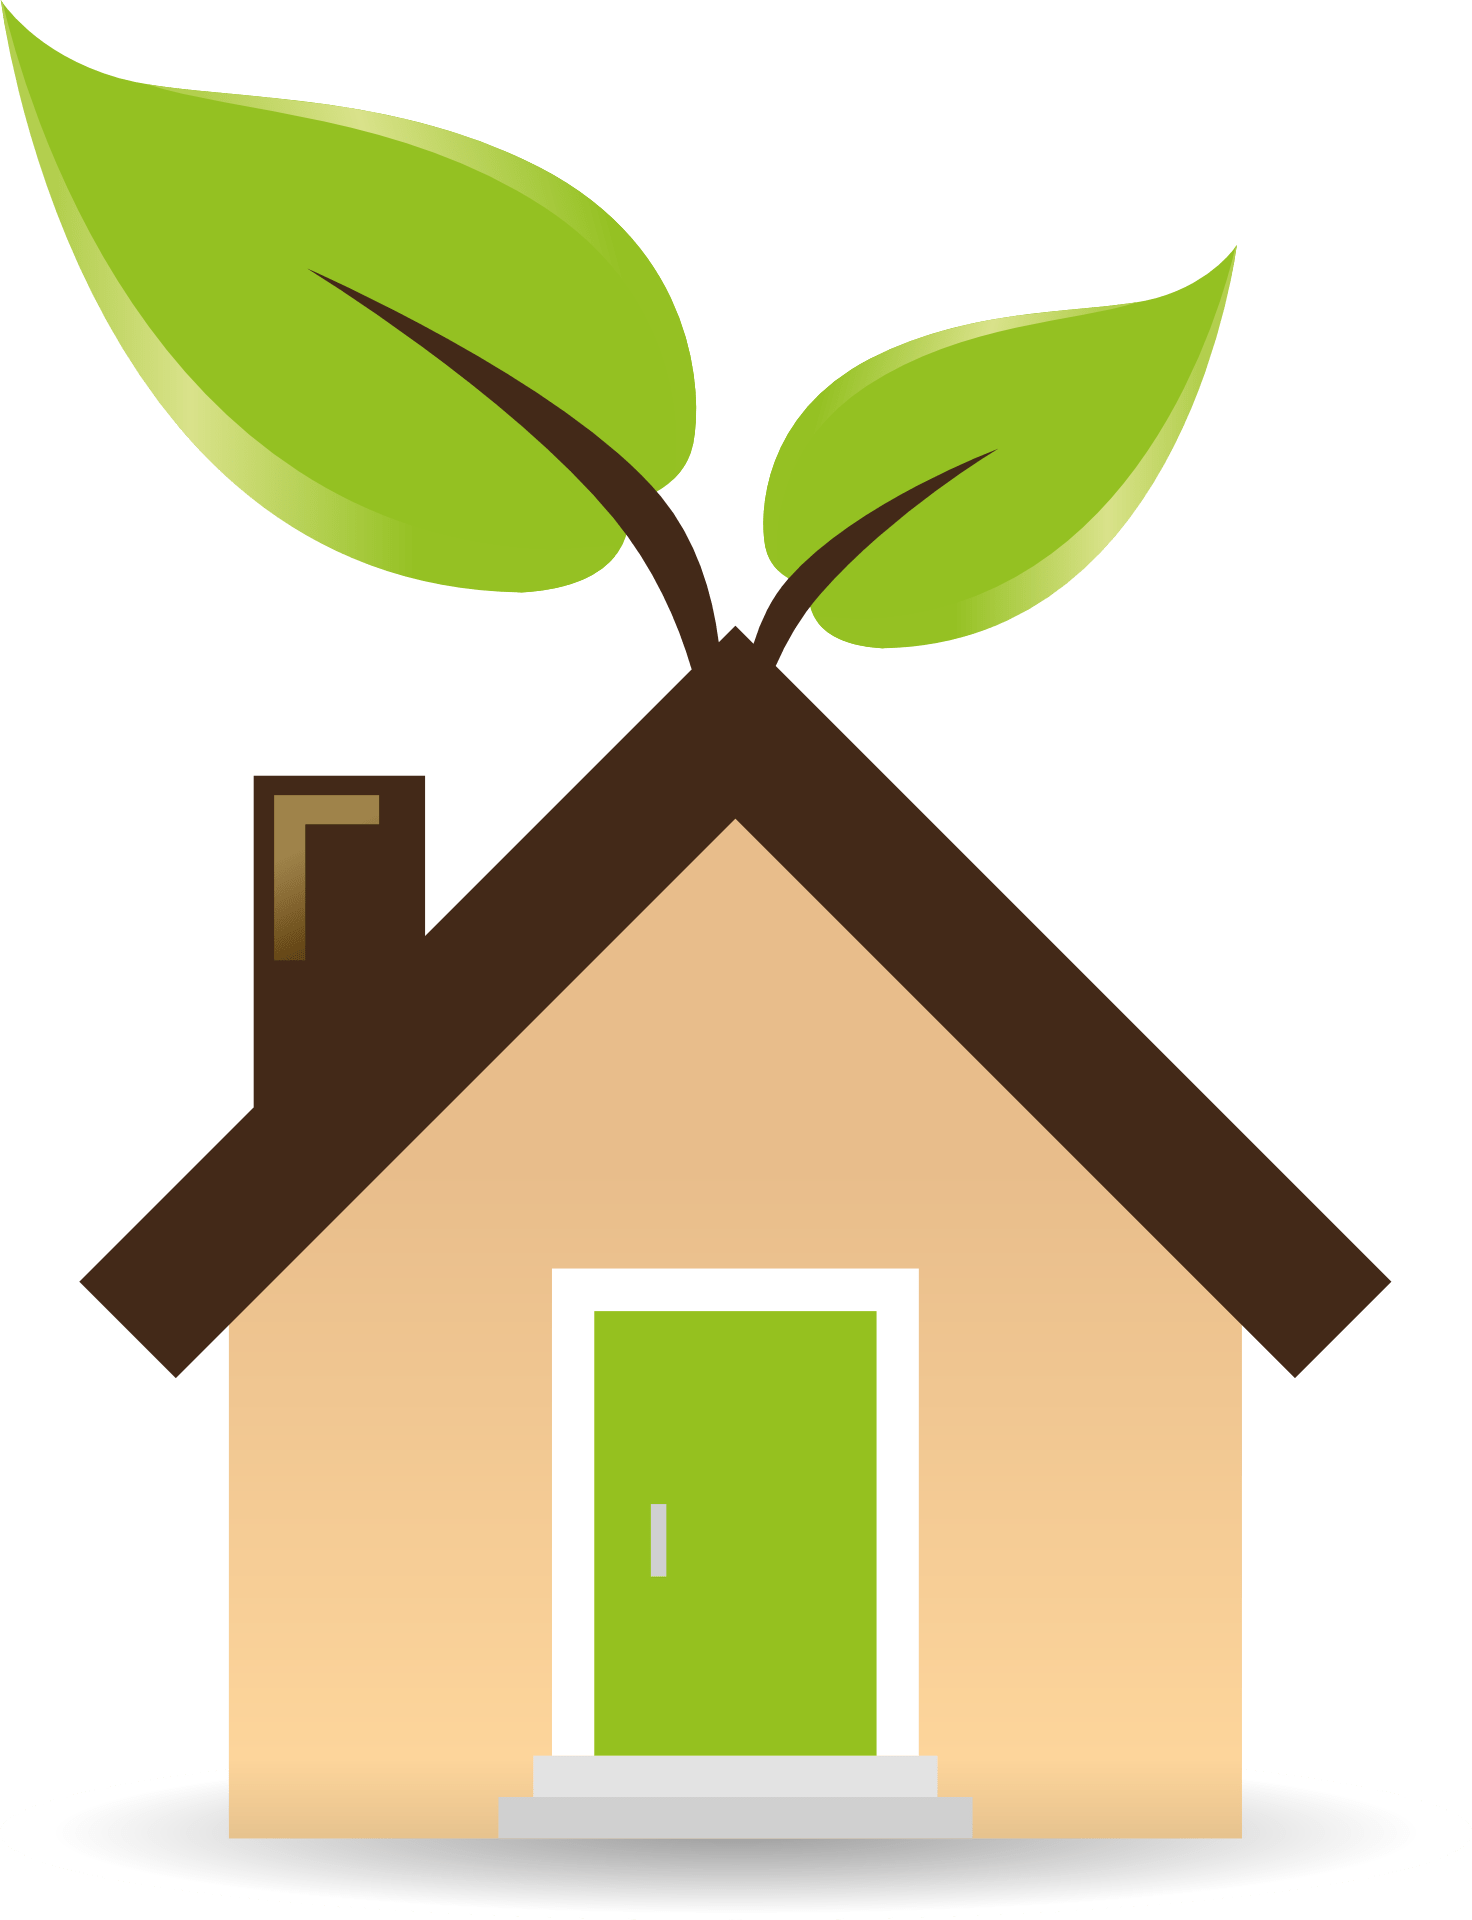 8 Tips on Making Houses Eco Friendly for New Homeowners